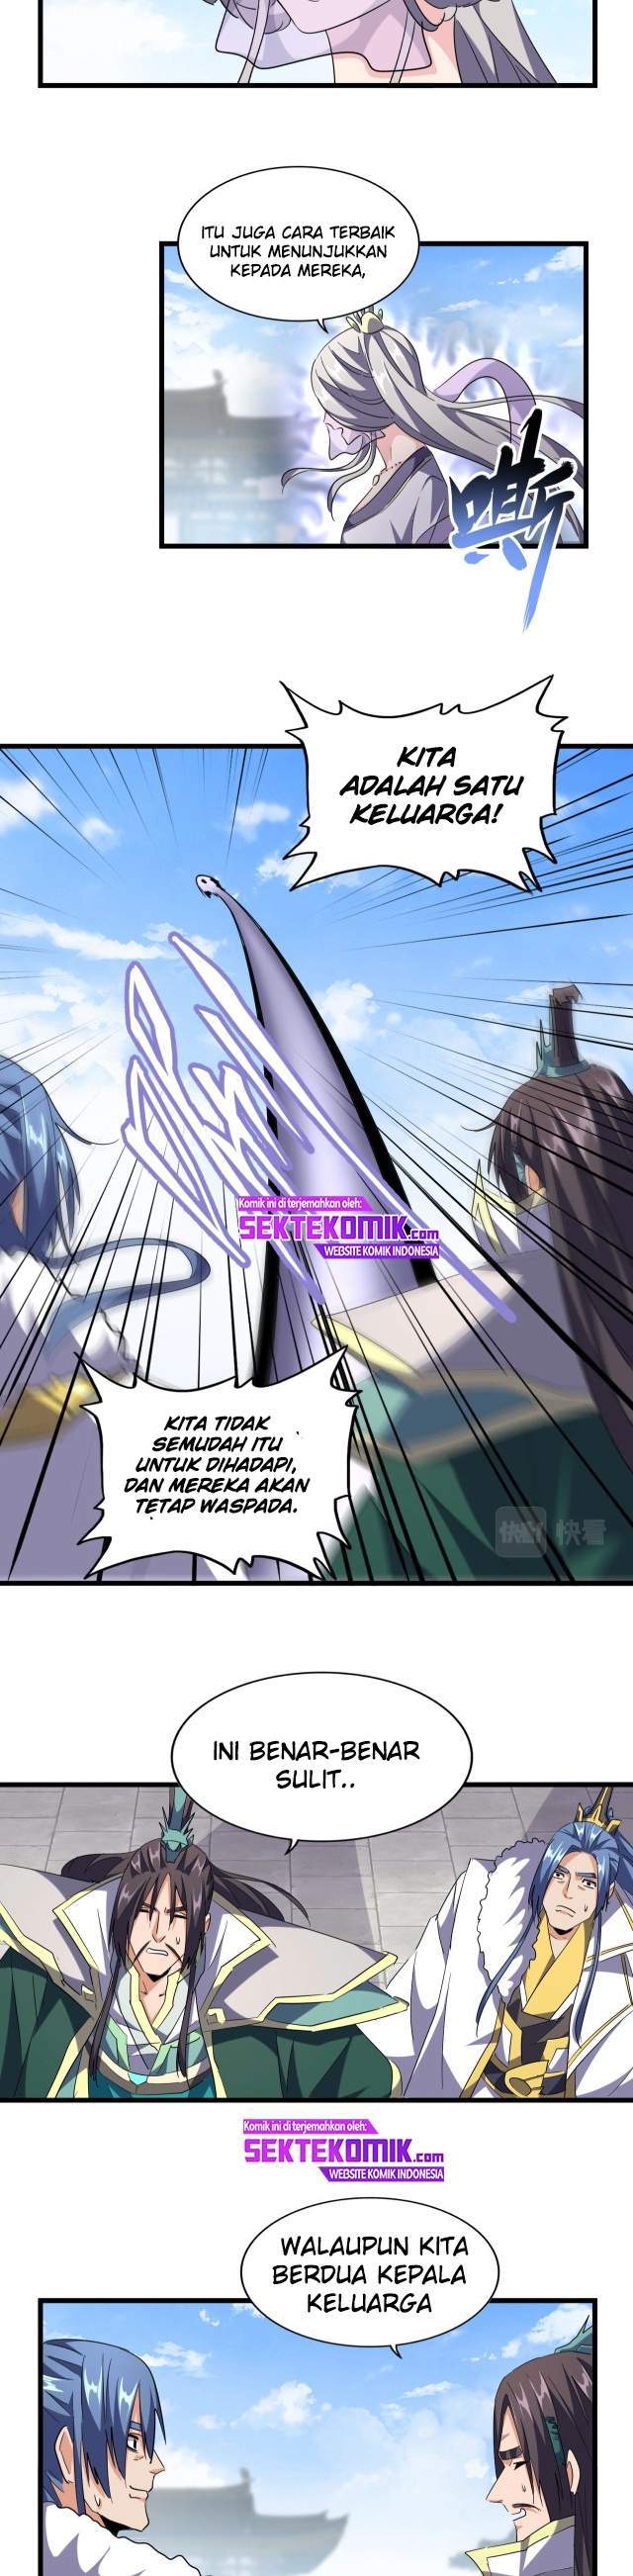 Magic Emperor Chapter 222 Image 5